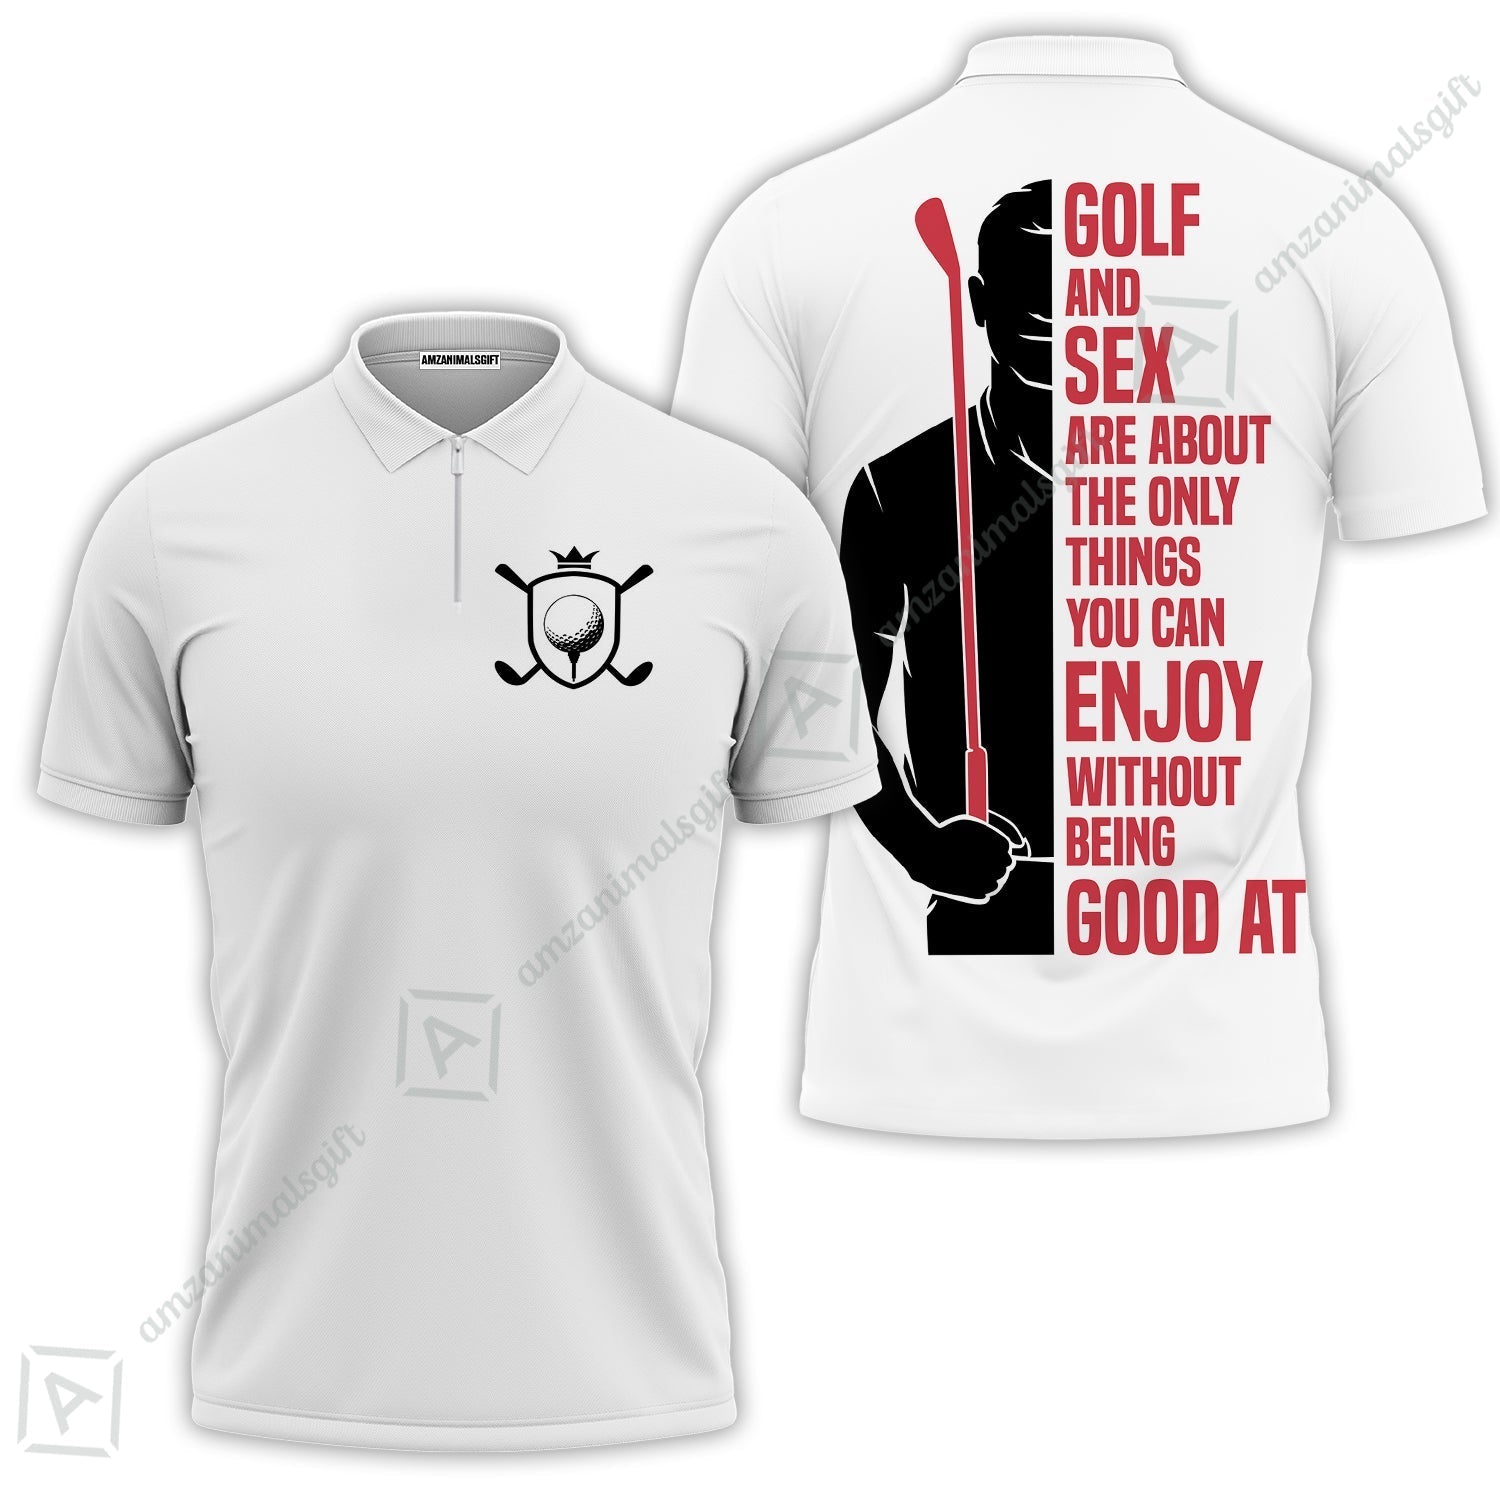 Golf Zip Polo Shirt - Golf And Sex Are About The Only Things You Can Enjoy Without Being Good At Polo Shirt,True Golf Zip Polo Shirt